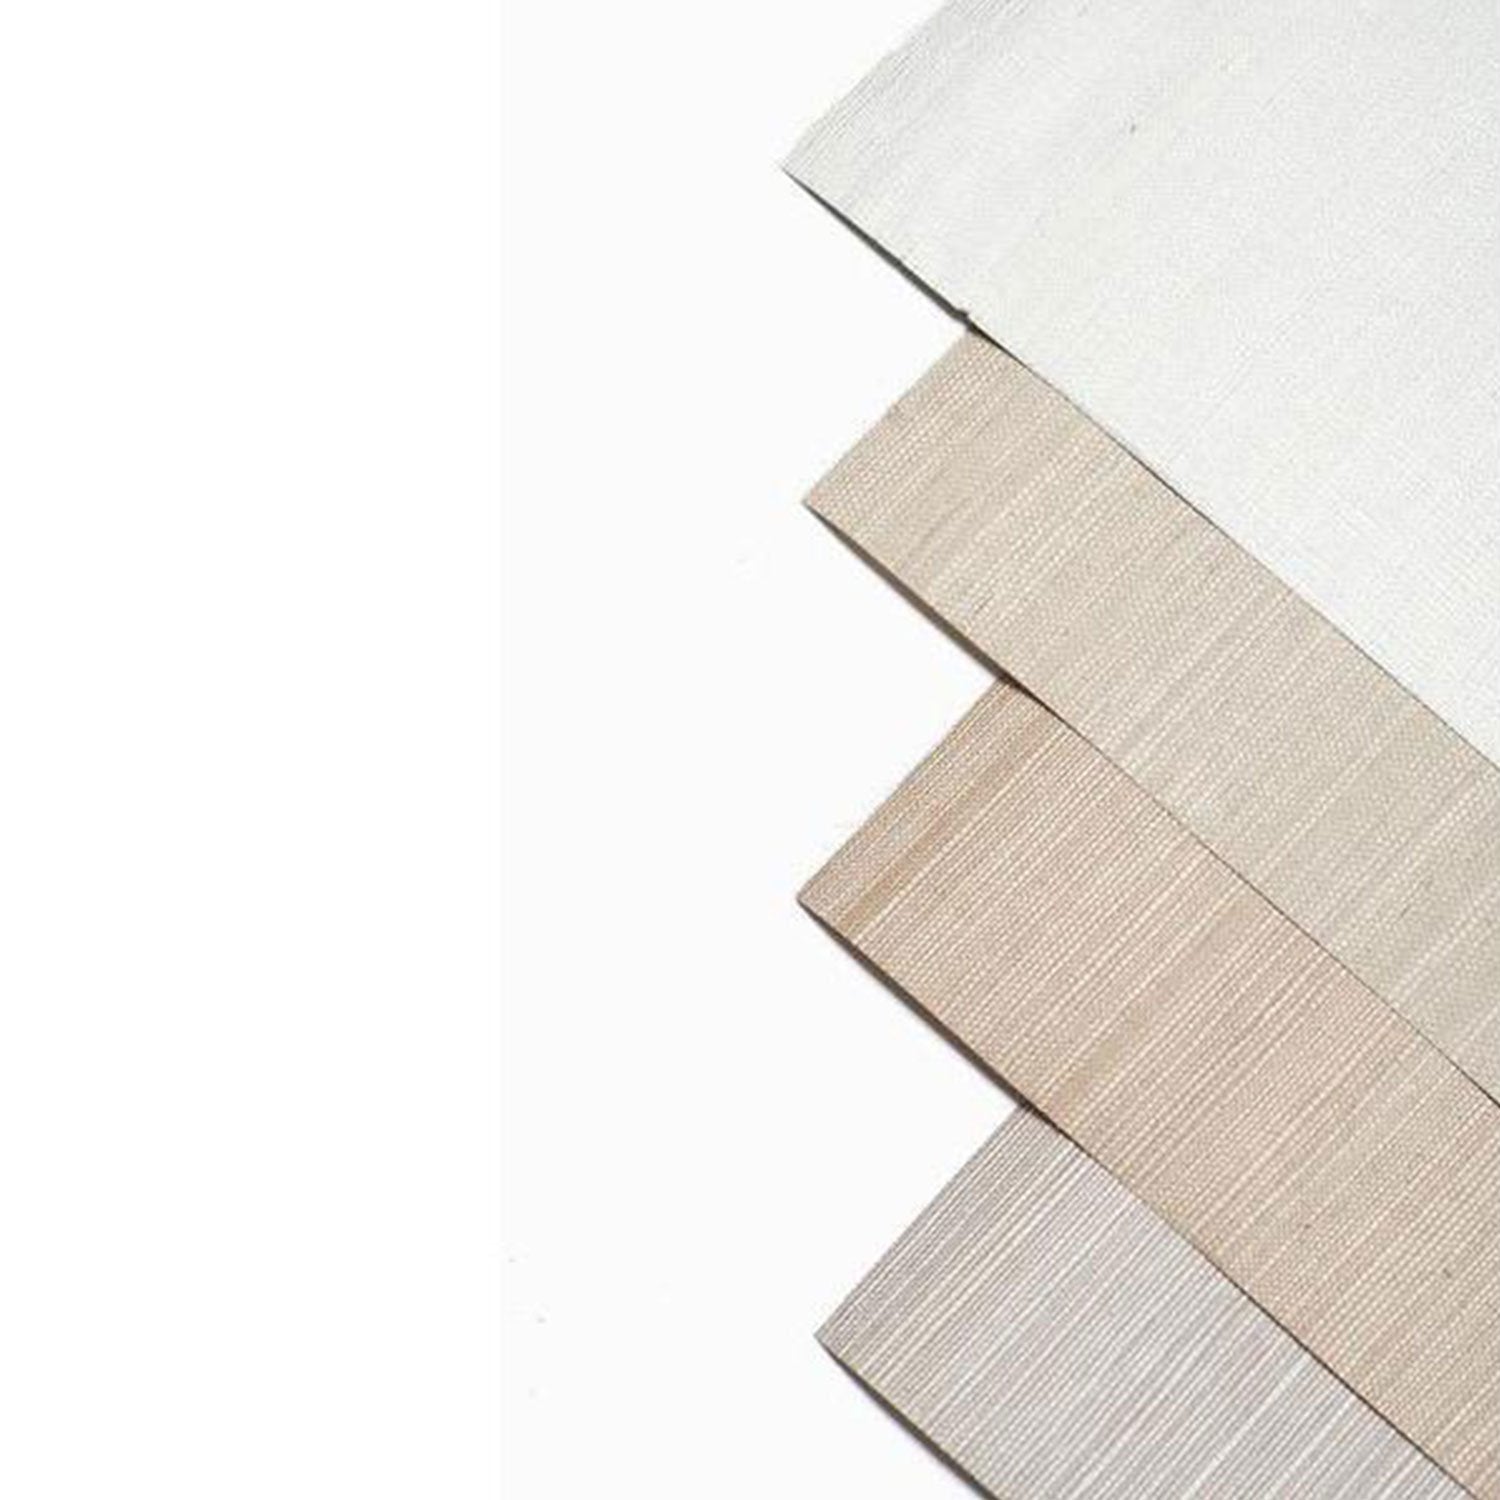 Grasscloth Wallpaper Sample Swatches in Neutral Colors